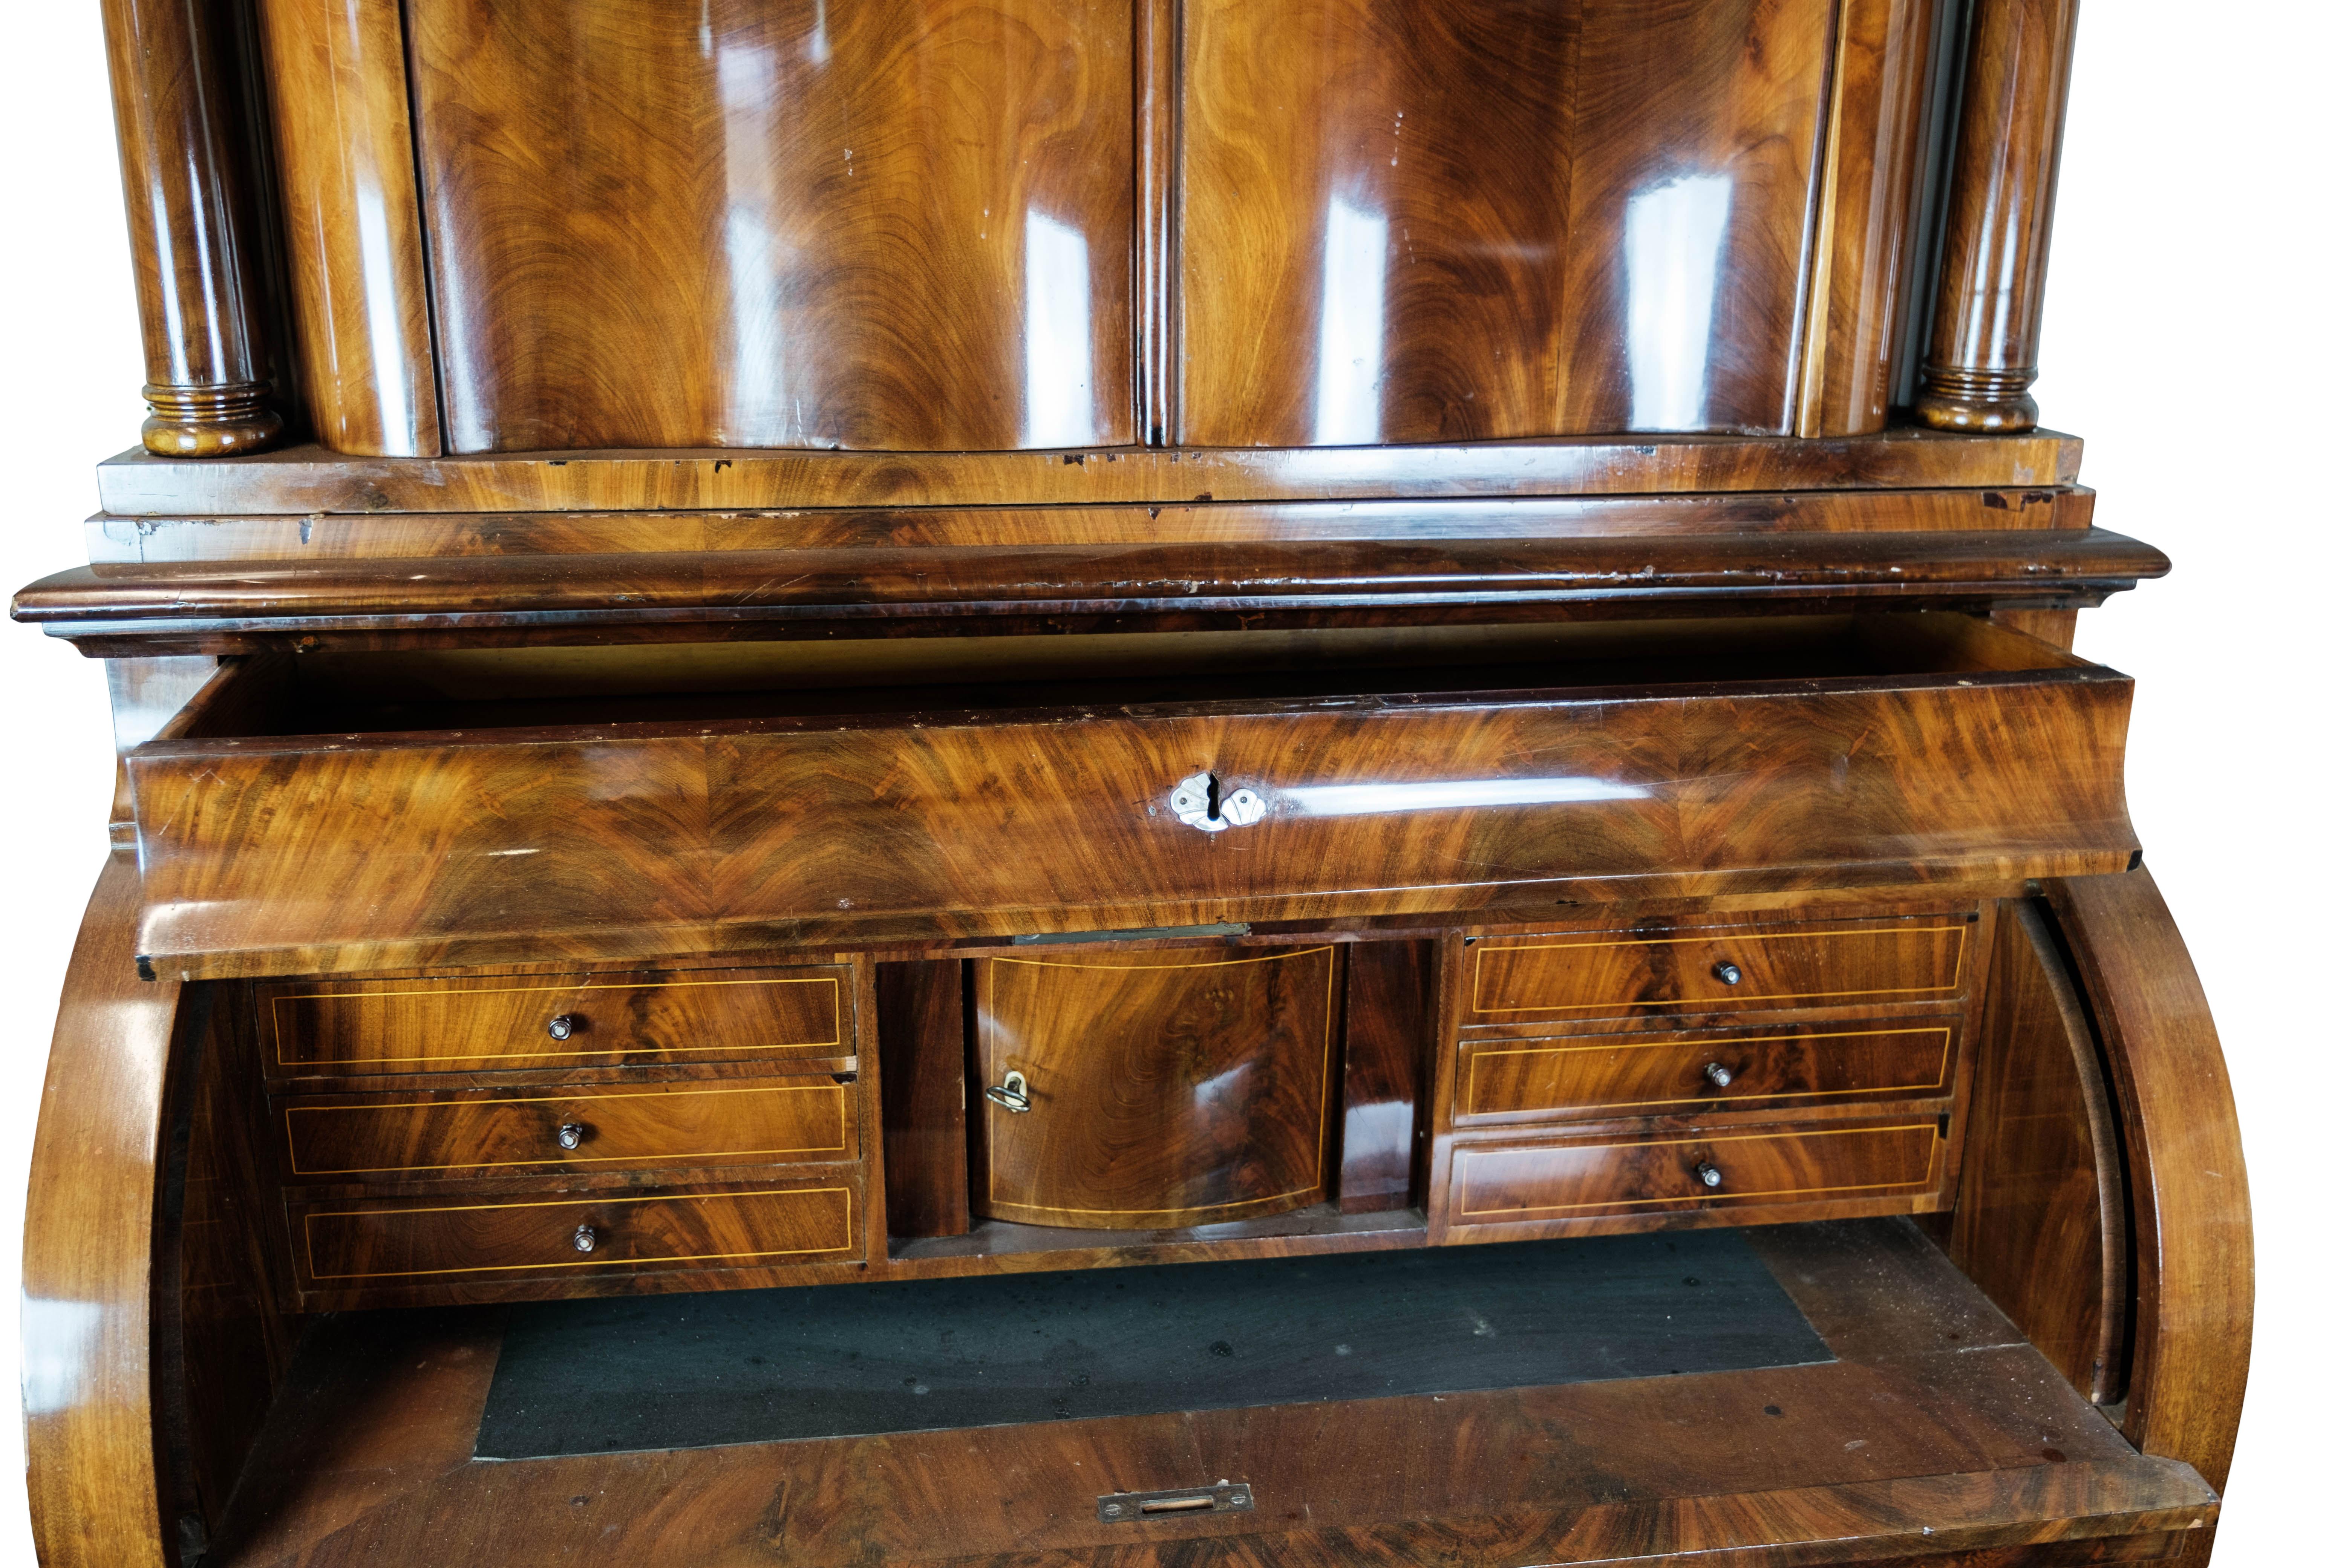 Large bureau of hand polsihed mahogany from Copenhagen in the 1860s. The cabinet is in great vintage condition.